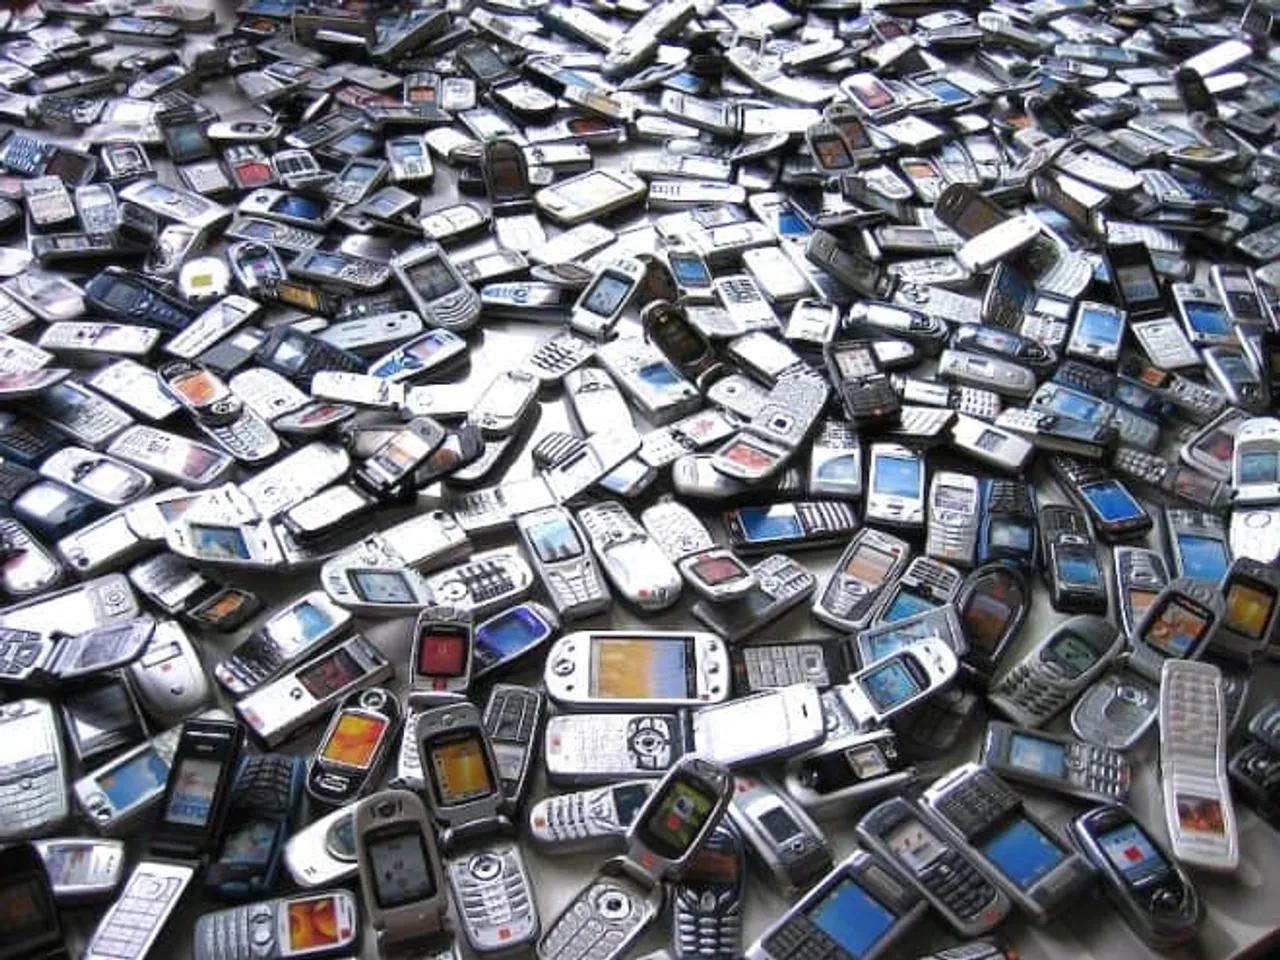 Global e-waste poised to surge from 47.8 MT to 49.8 MT by 2018: Study